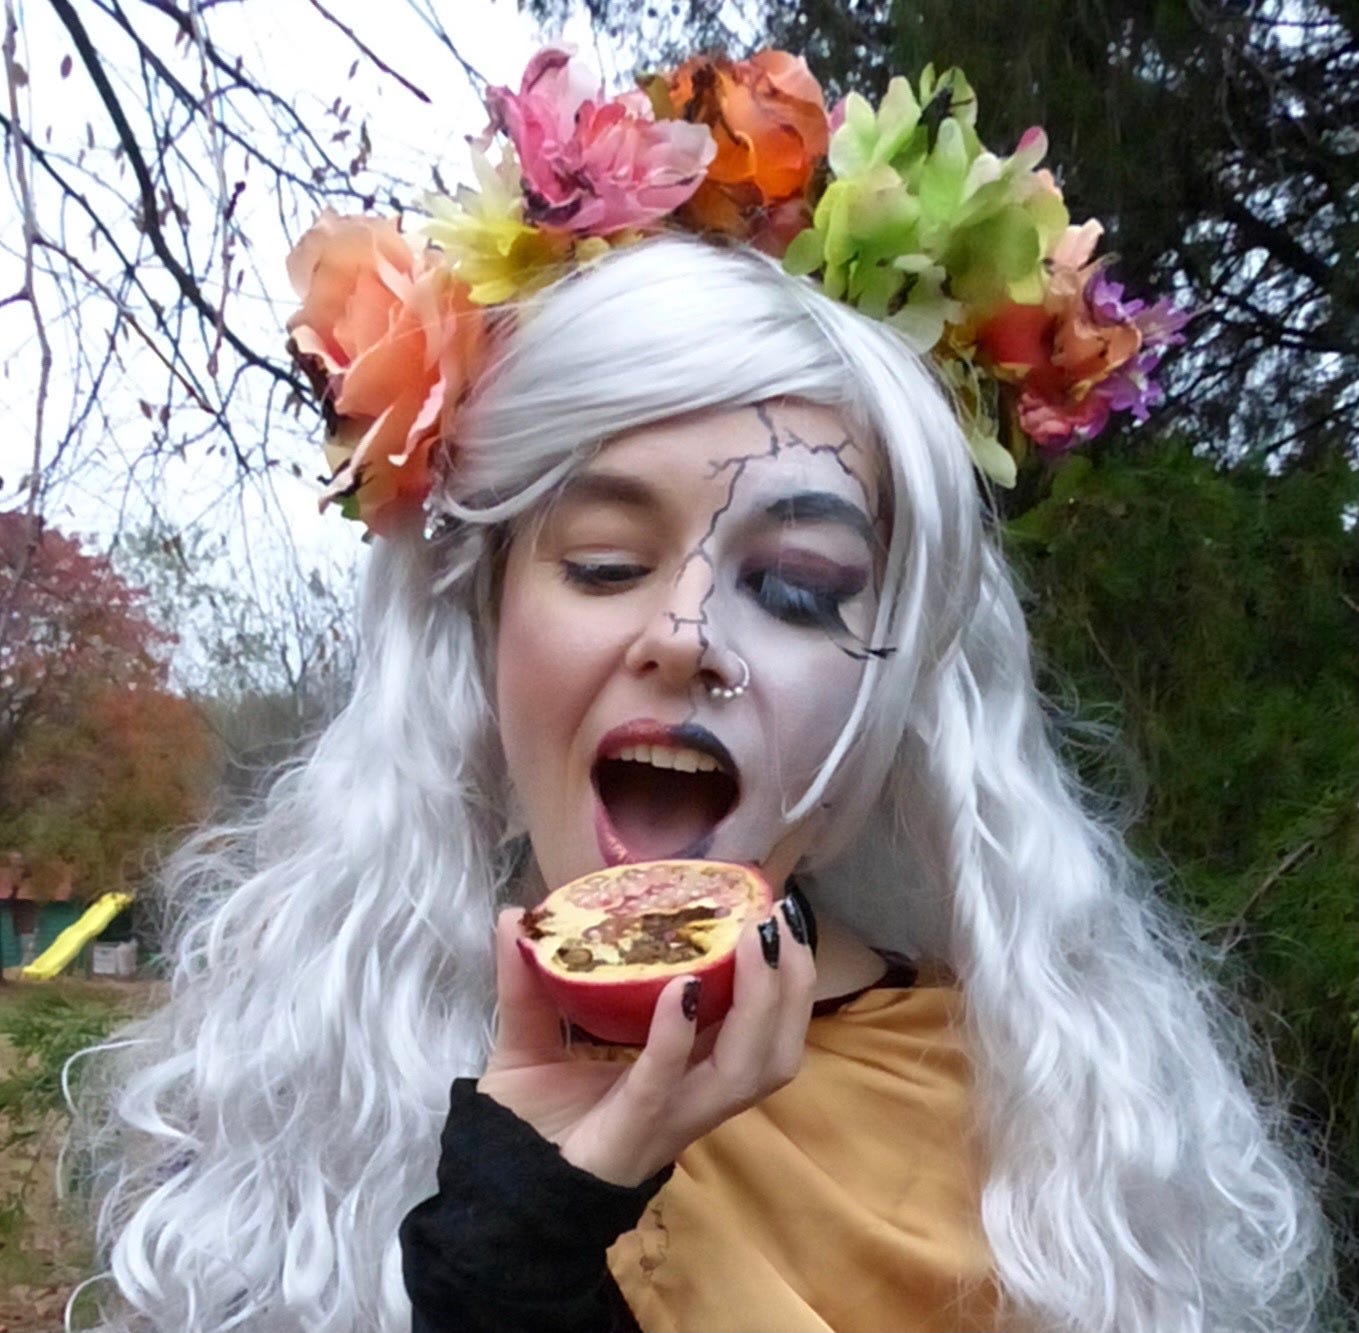 Persephone in a singed flower crown about to take a bite of a pomegranate. Half of it is rotten; half of it is fresh, just like half her face is Blossomtime fresh and the other is the Dread Queen of the Underworld